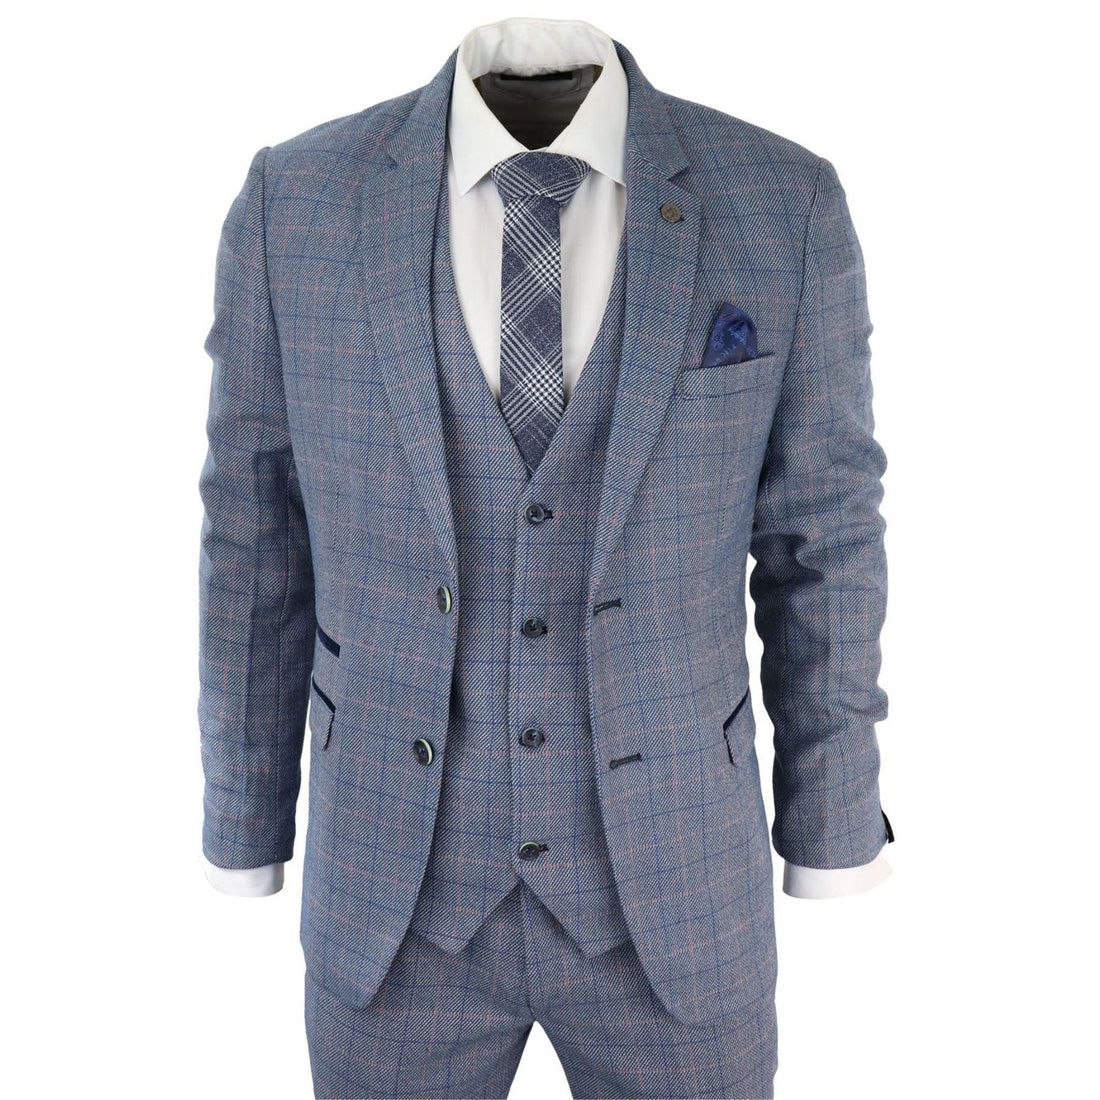 Mens 3 Piece Suit Sky Blue Check Wool Feel Marc Darcy Tailored Fit Wedding Prom Harry - Knighthood Store